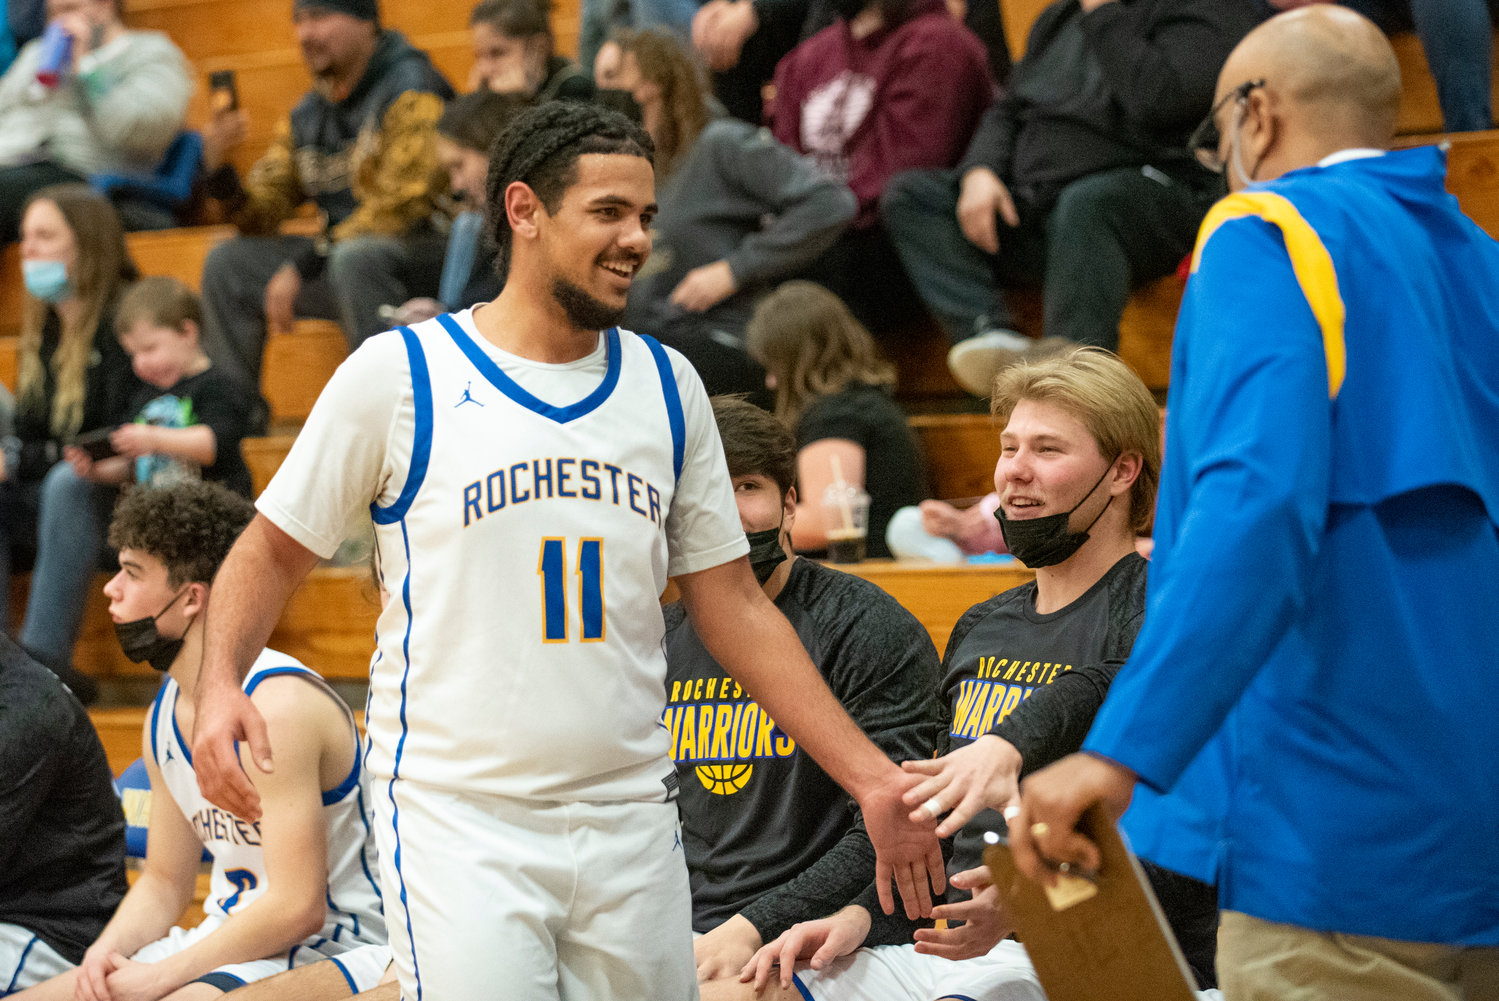 Rochester's Cam'Ron Henderson (11) high-fives teammates during a home game on Jan. 19.